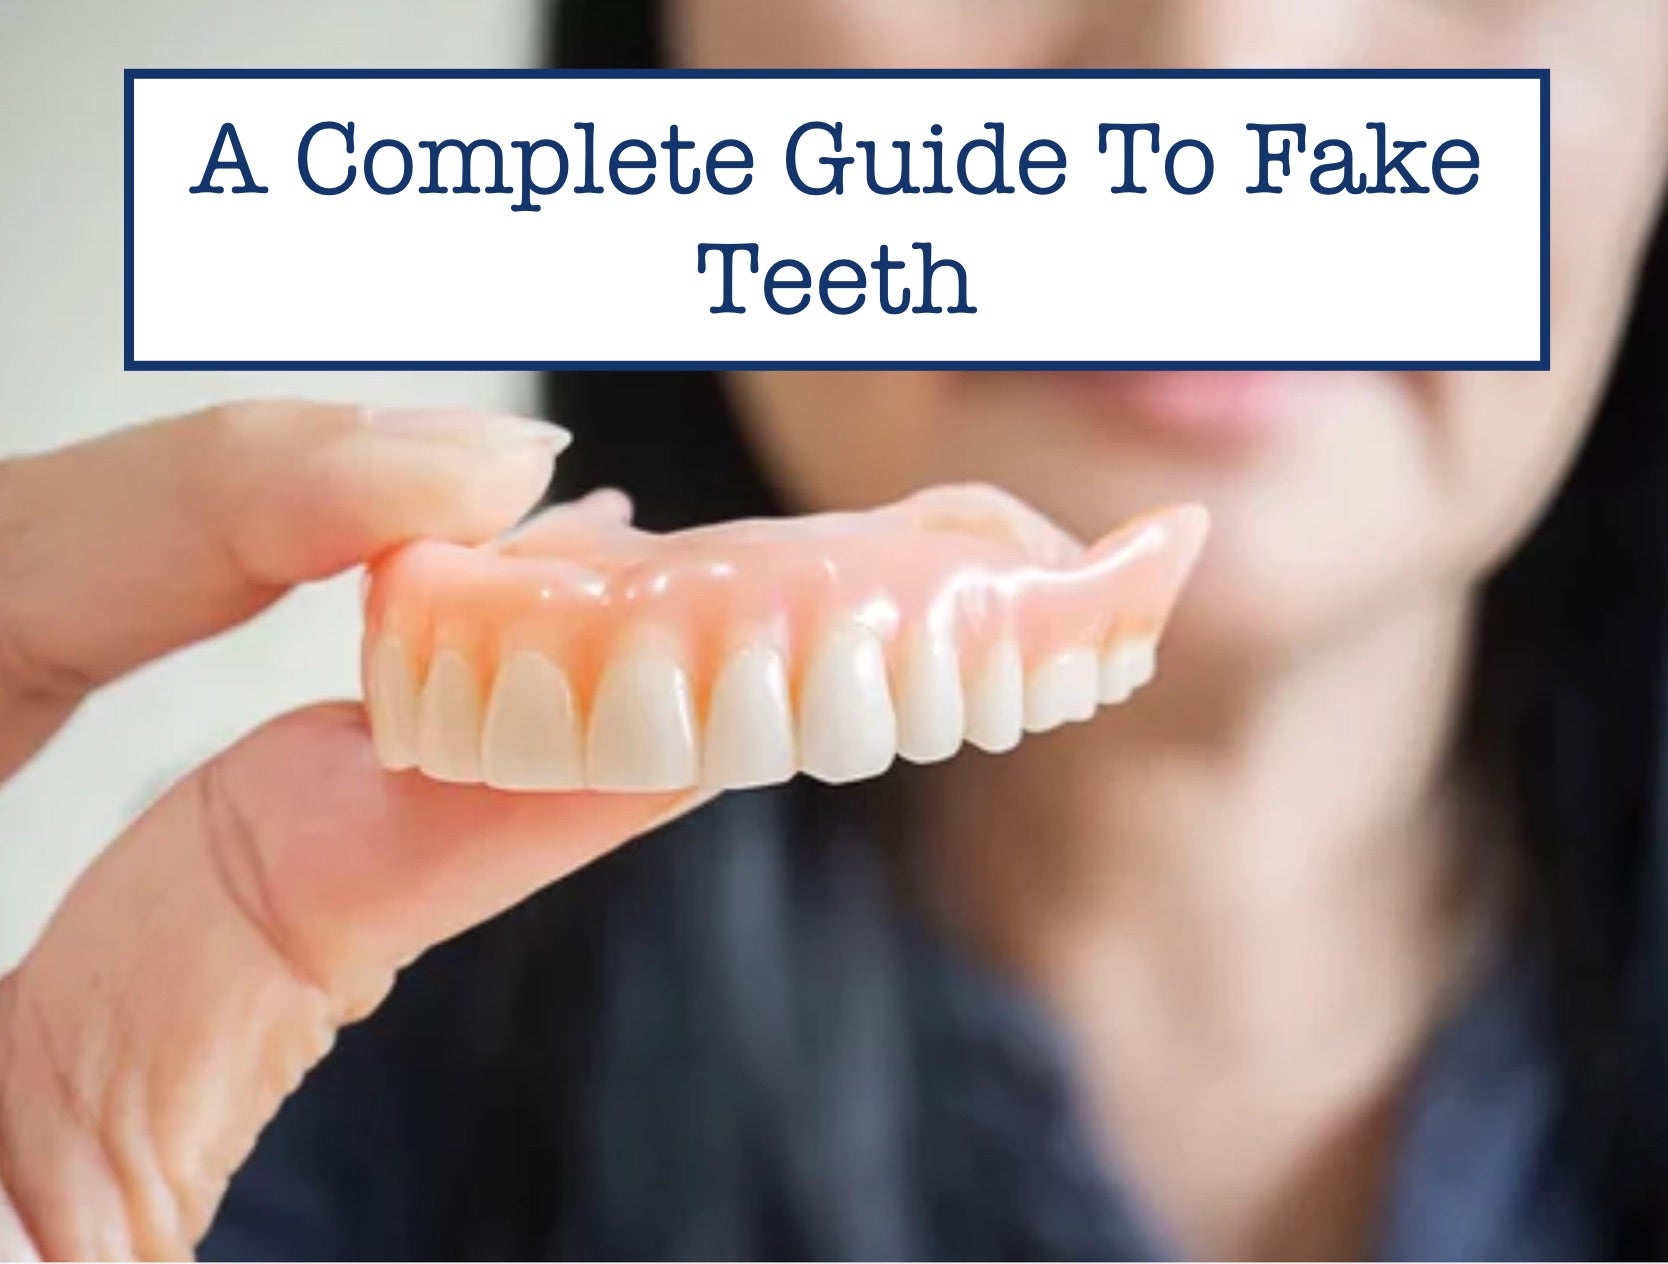 A Complete Guide To Fake Teeth